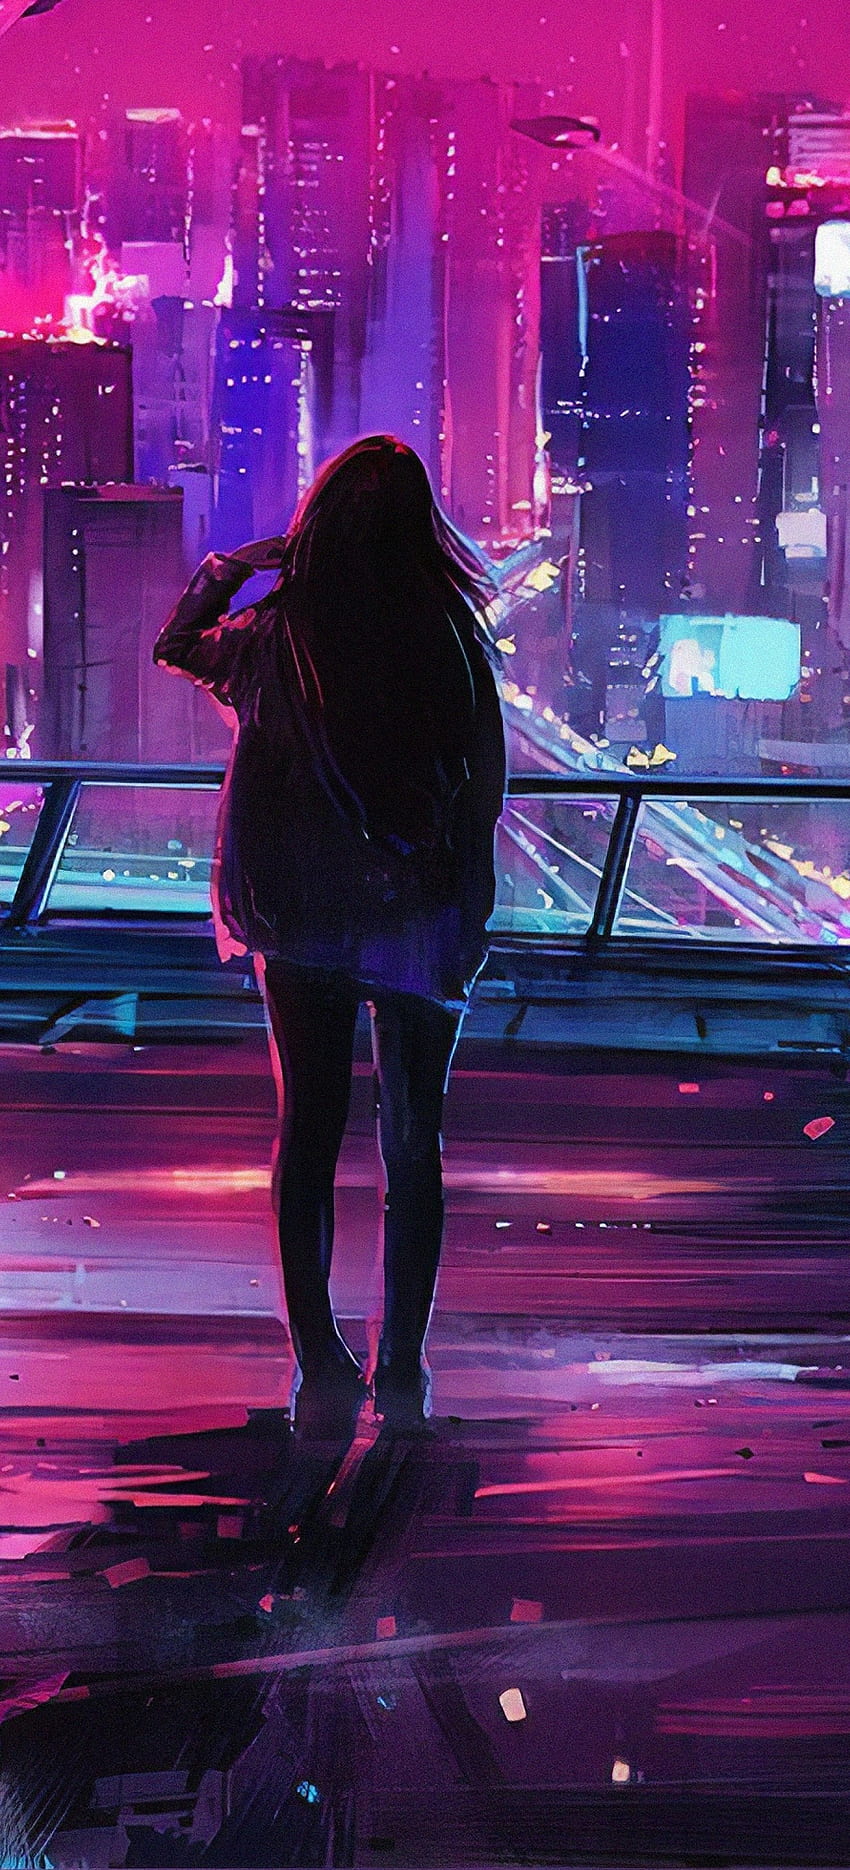 Neon City, Girl, Back View, Night, Lights for OnePlus 8 Pro, Oppo Find X2, Neon Night Lights HD phone wallpaper